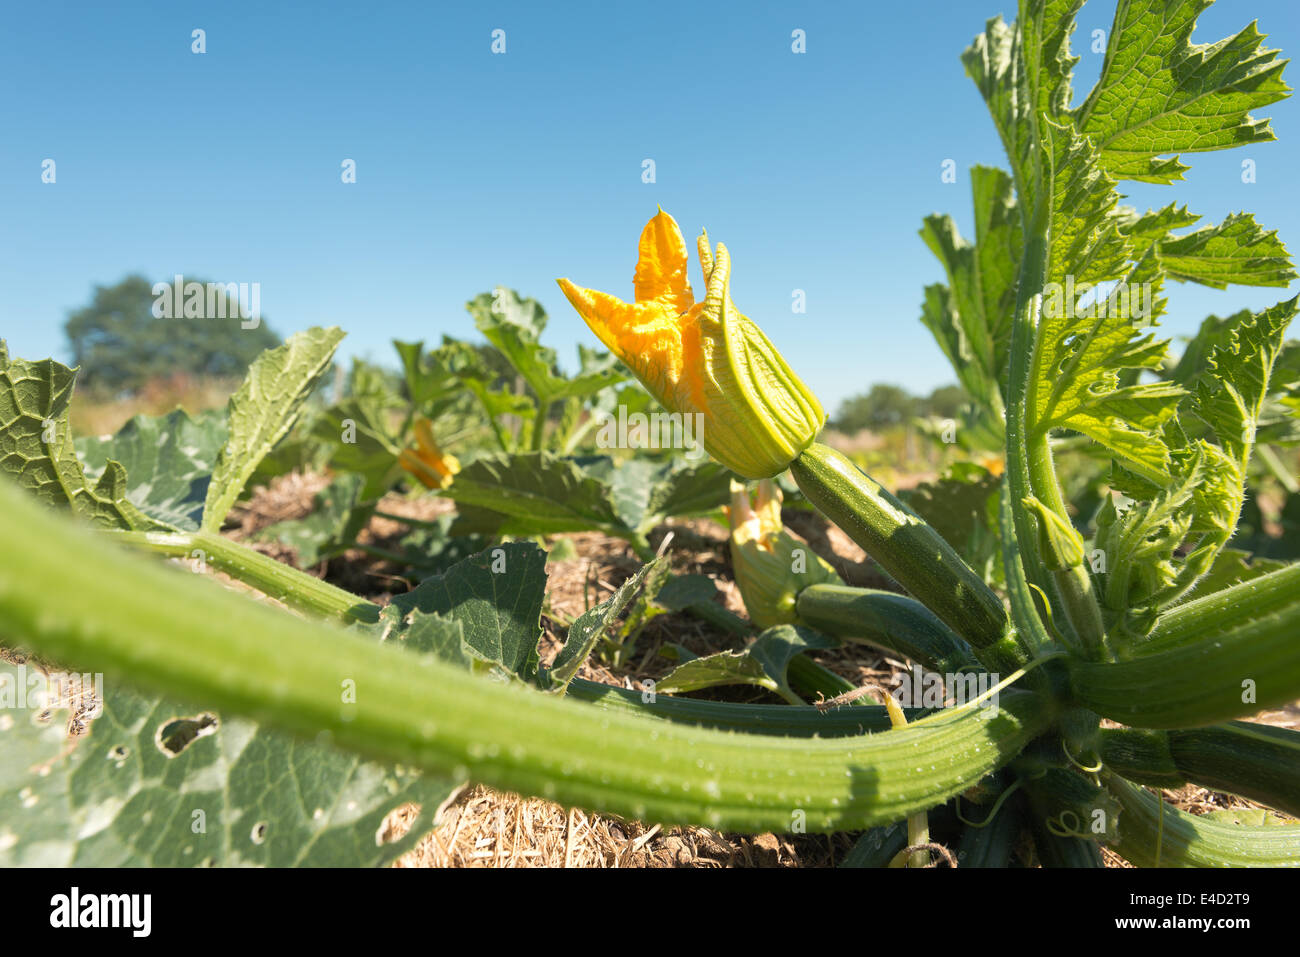 Squash courgette marrow organic crop flowering Summer crop ripening hidden beneath a mass of protective leaves in field Stock Photo